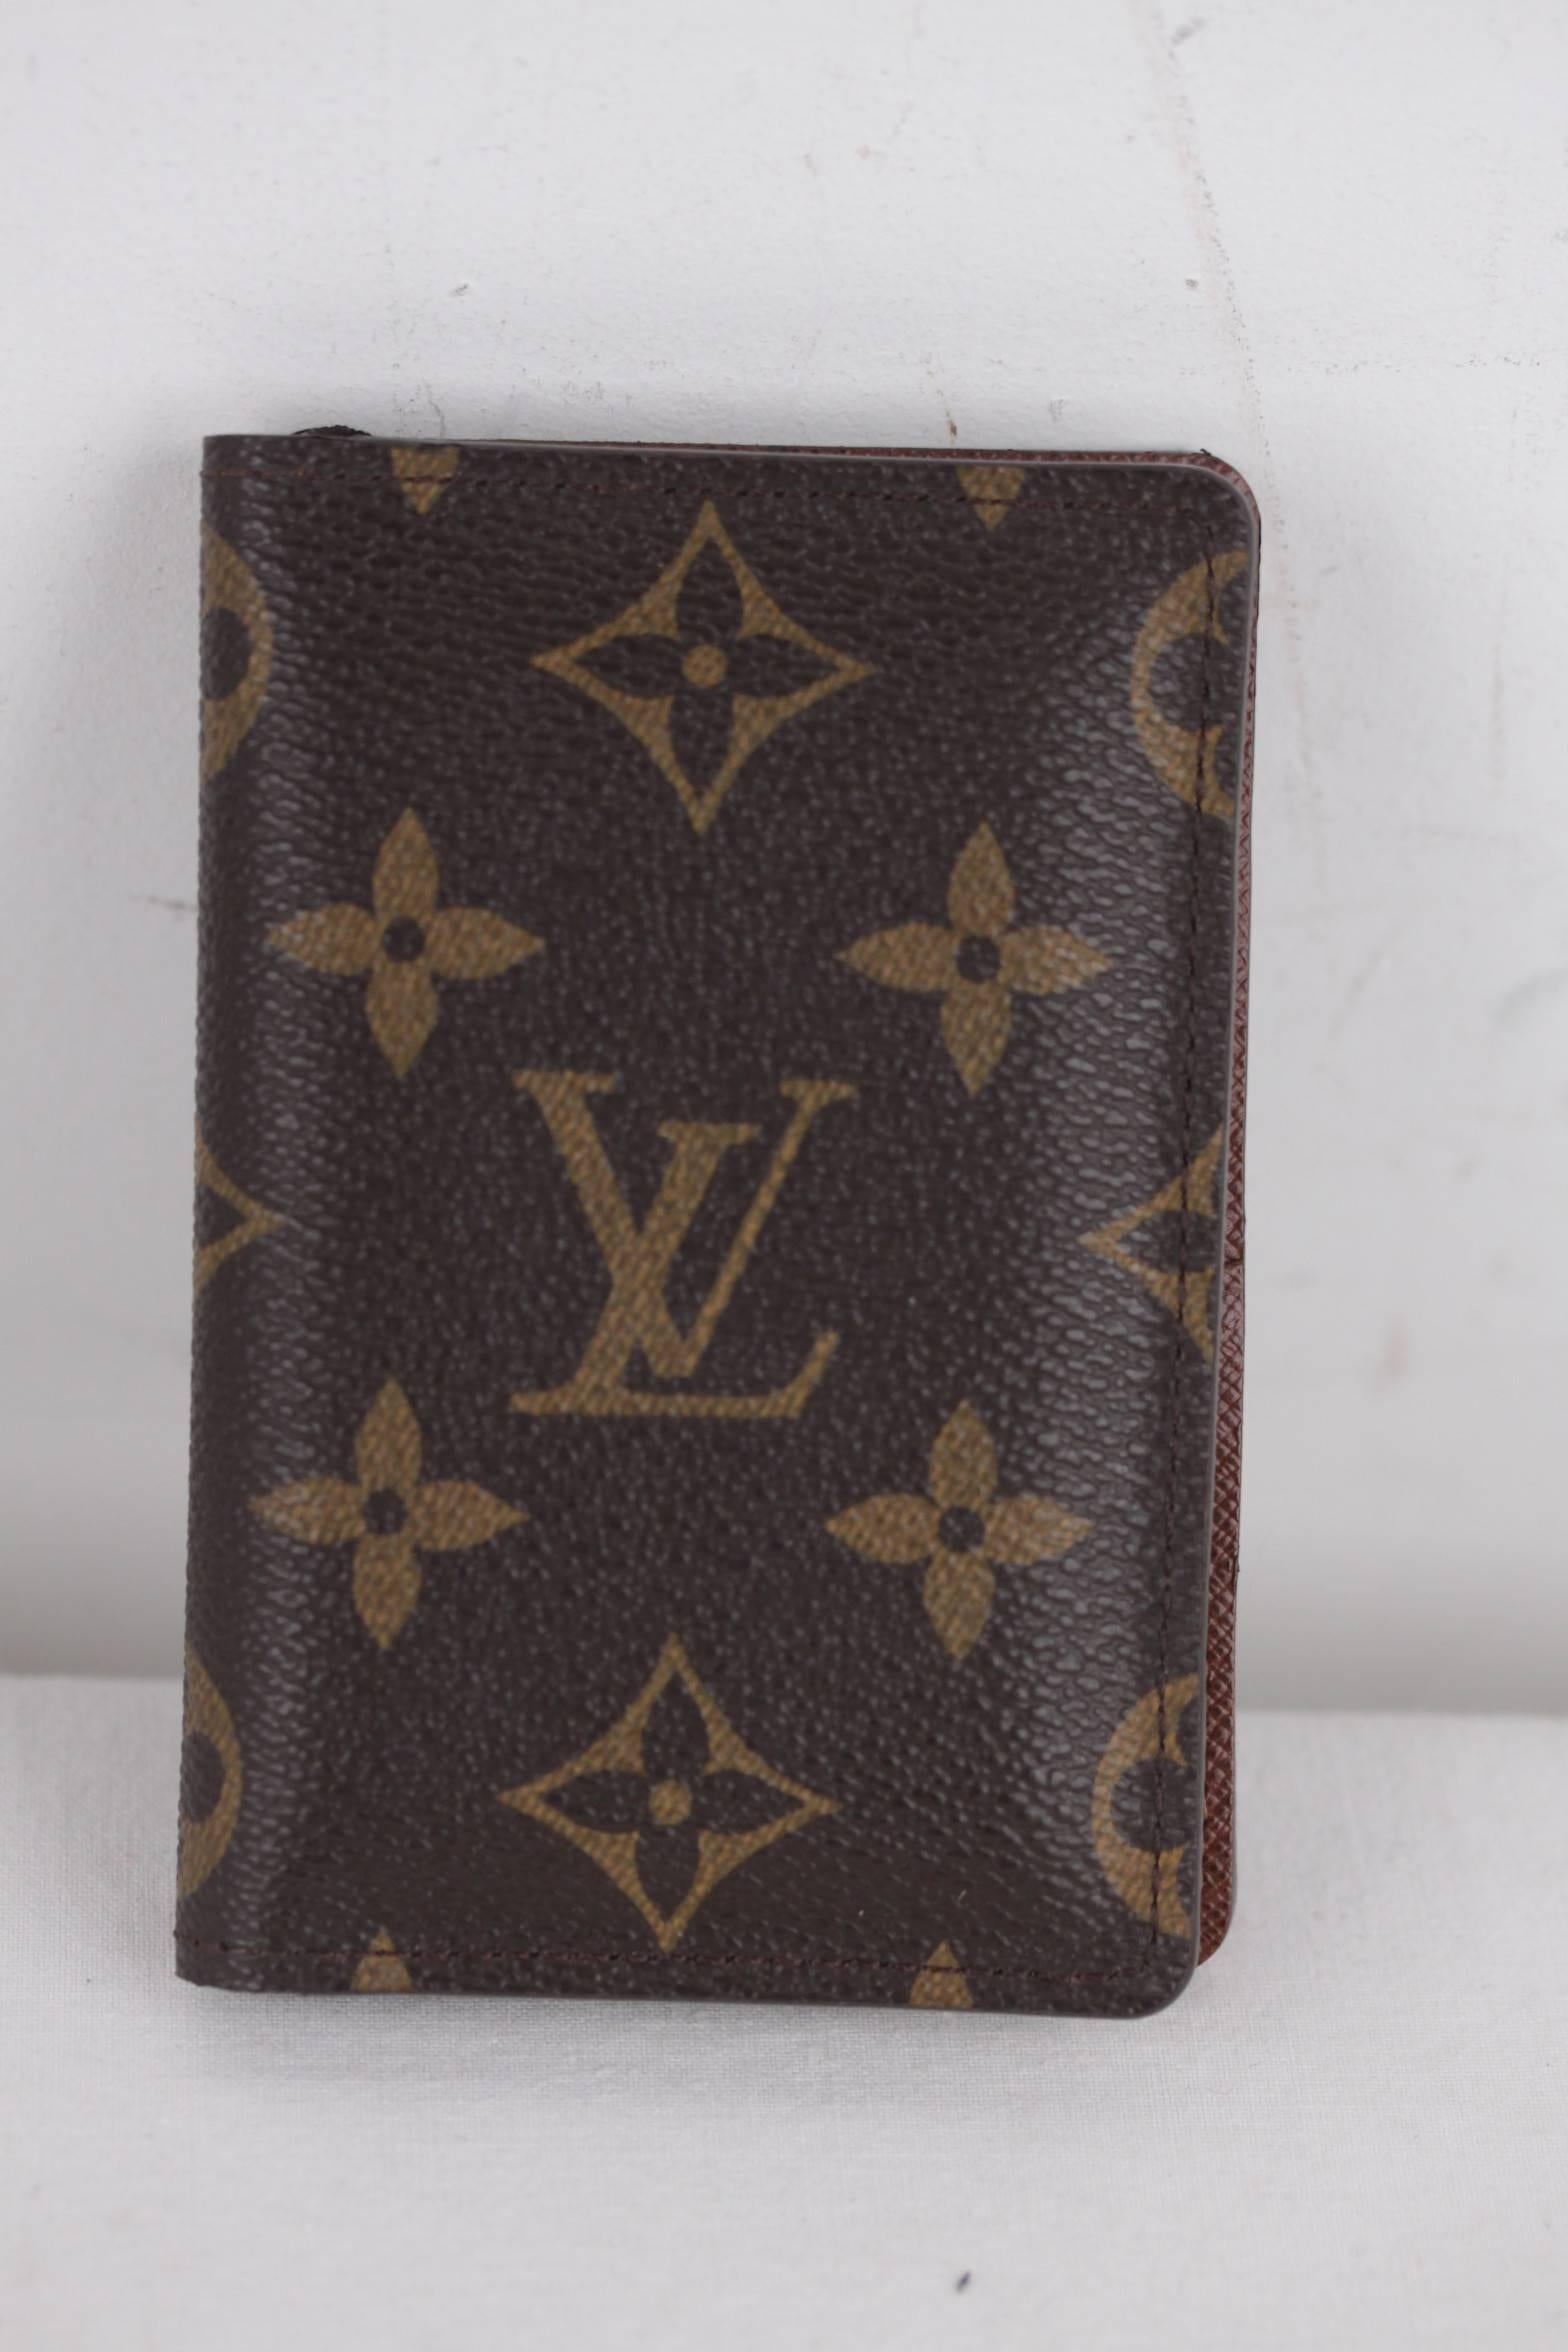 Brand: LOUIS VUITTON Paris - Made in France

Logos / Tags: 'LOUIS VUITTON Paris - Made in France' embossed inside, LV - LOUIS VUITTON monogram canvas, authenticity serial number embossed inside (#CT1161)

Condition (please read our condition